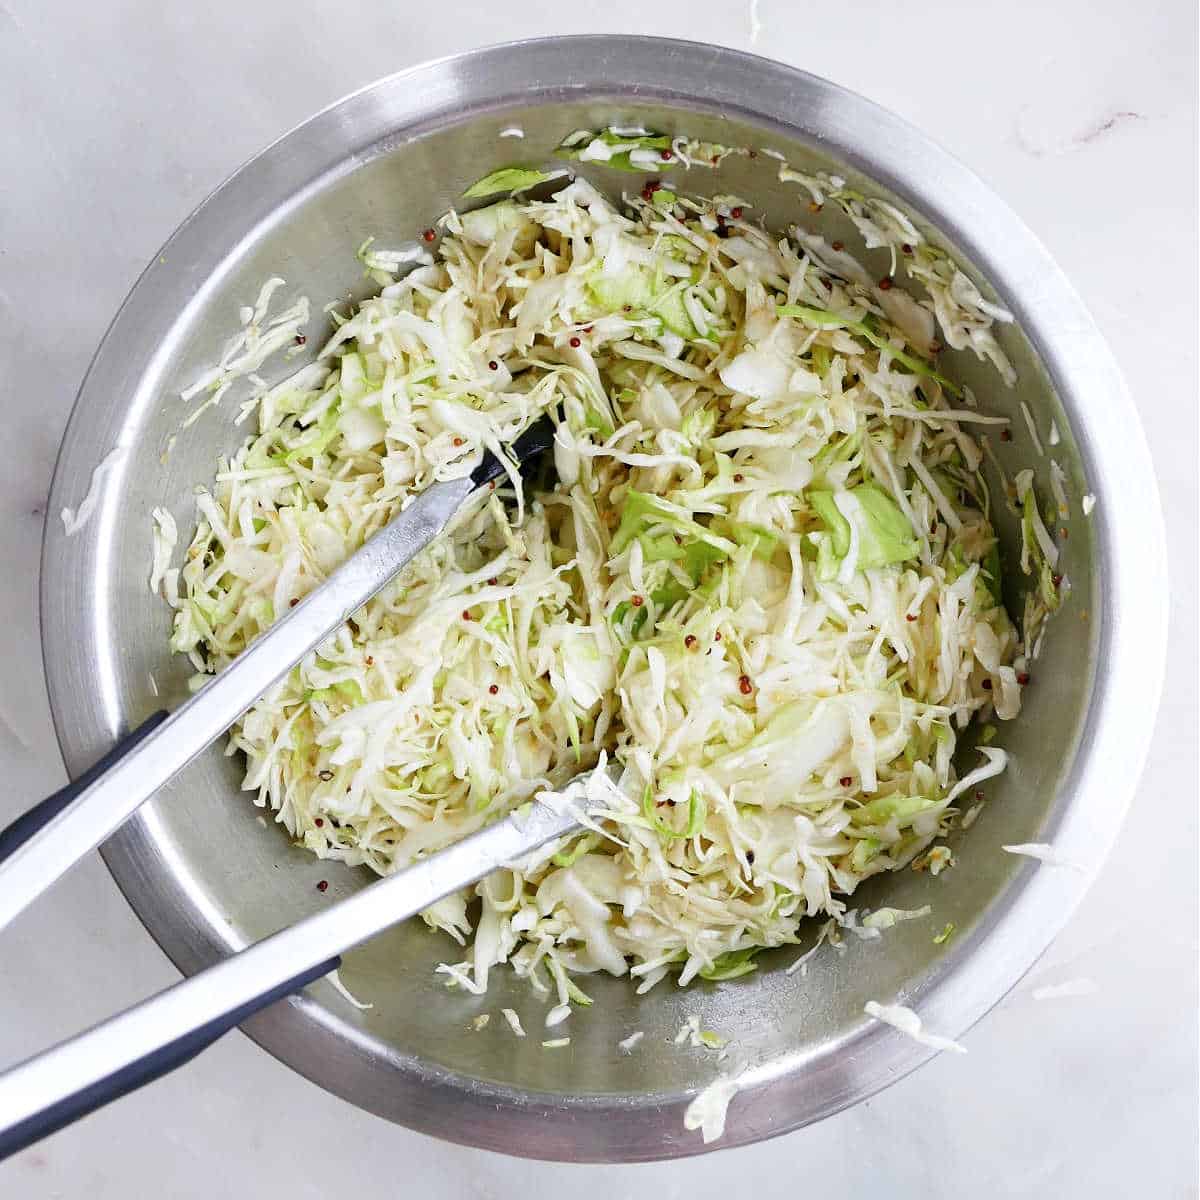 coleslaw mixed with a vinegar dressing in a mixing bowl with tongs